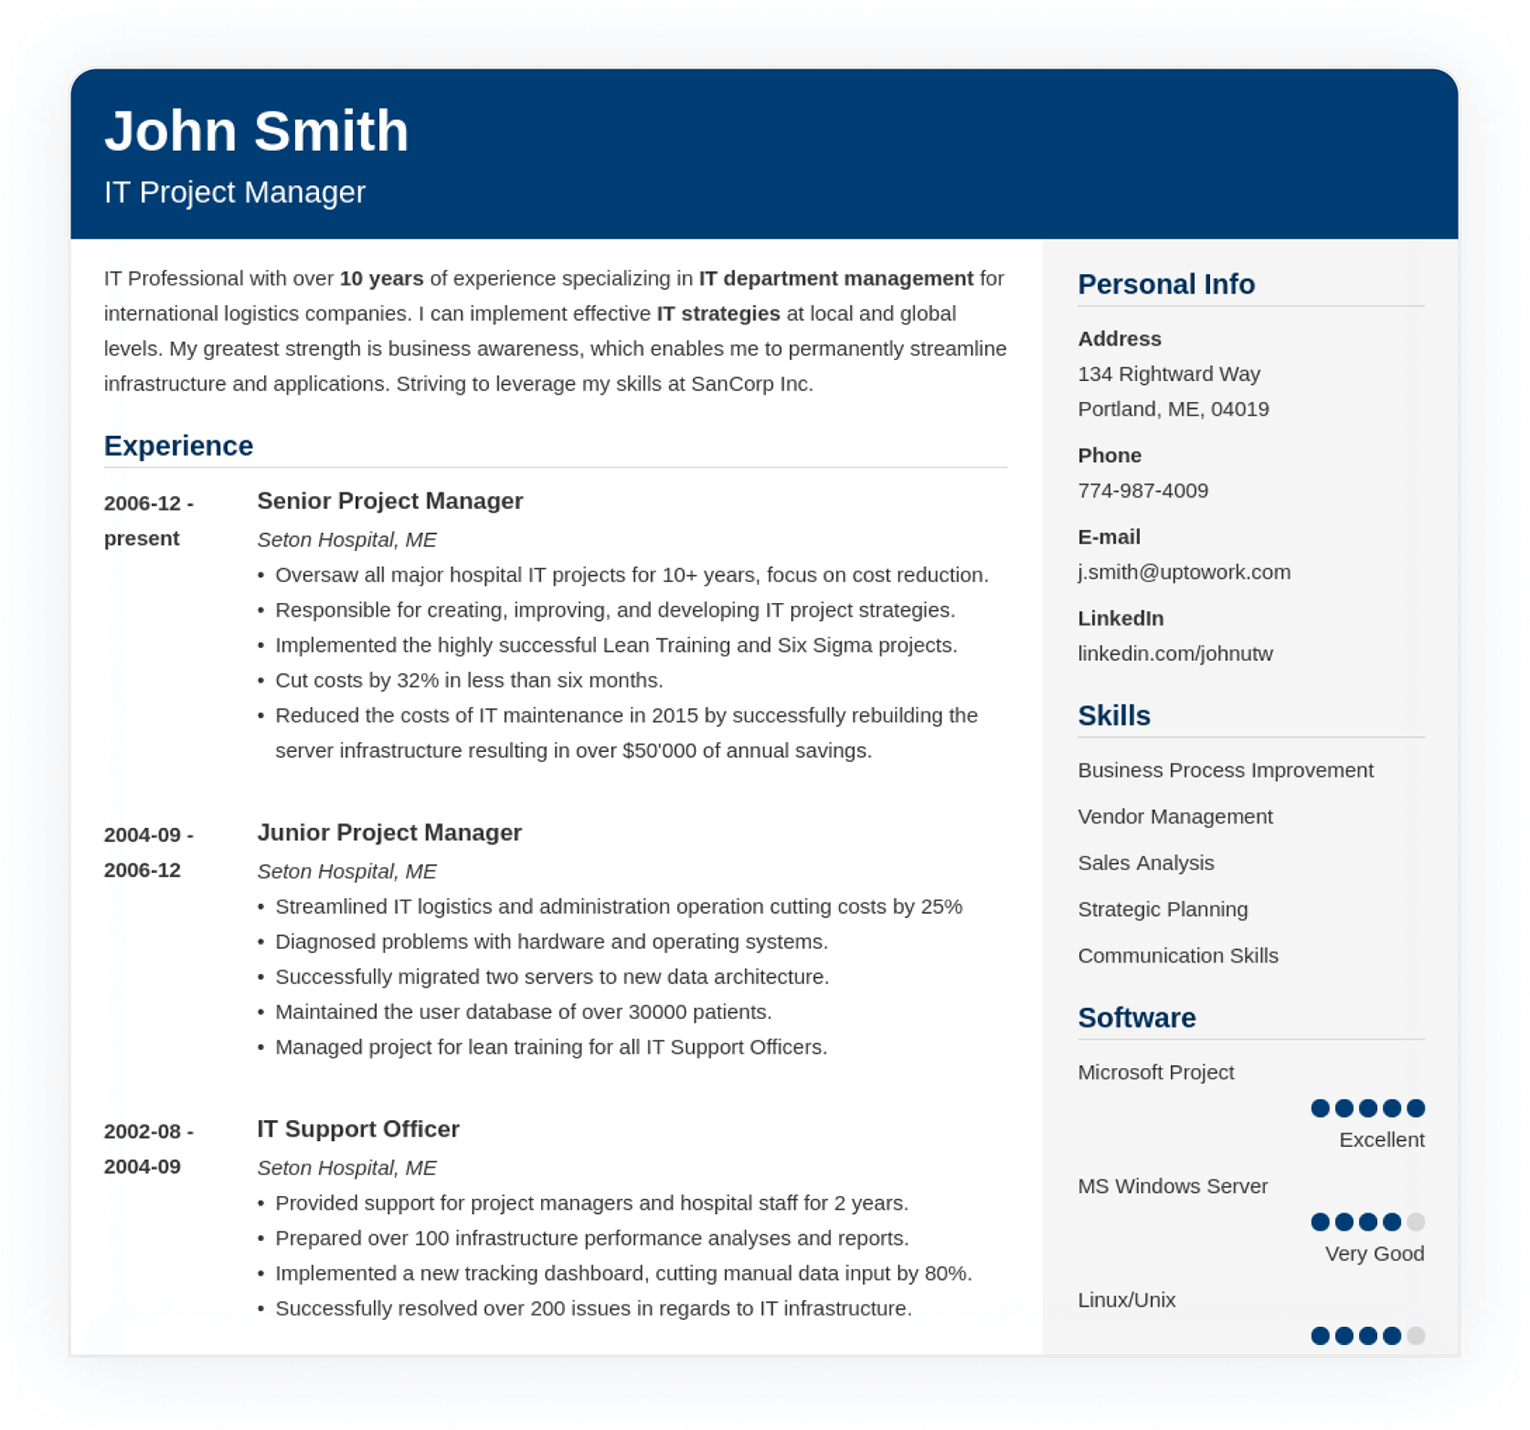 Remarkable Website - Resume Will Help You Get There